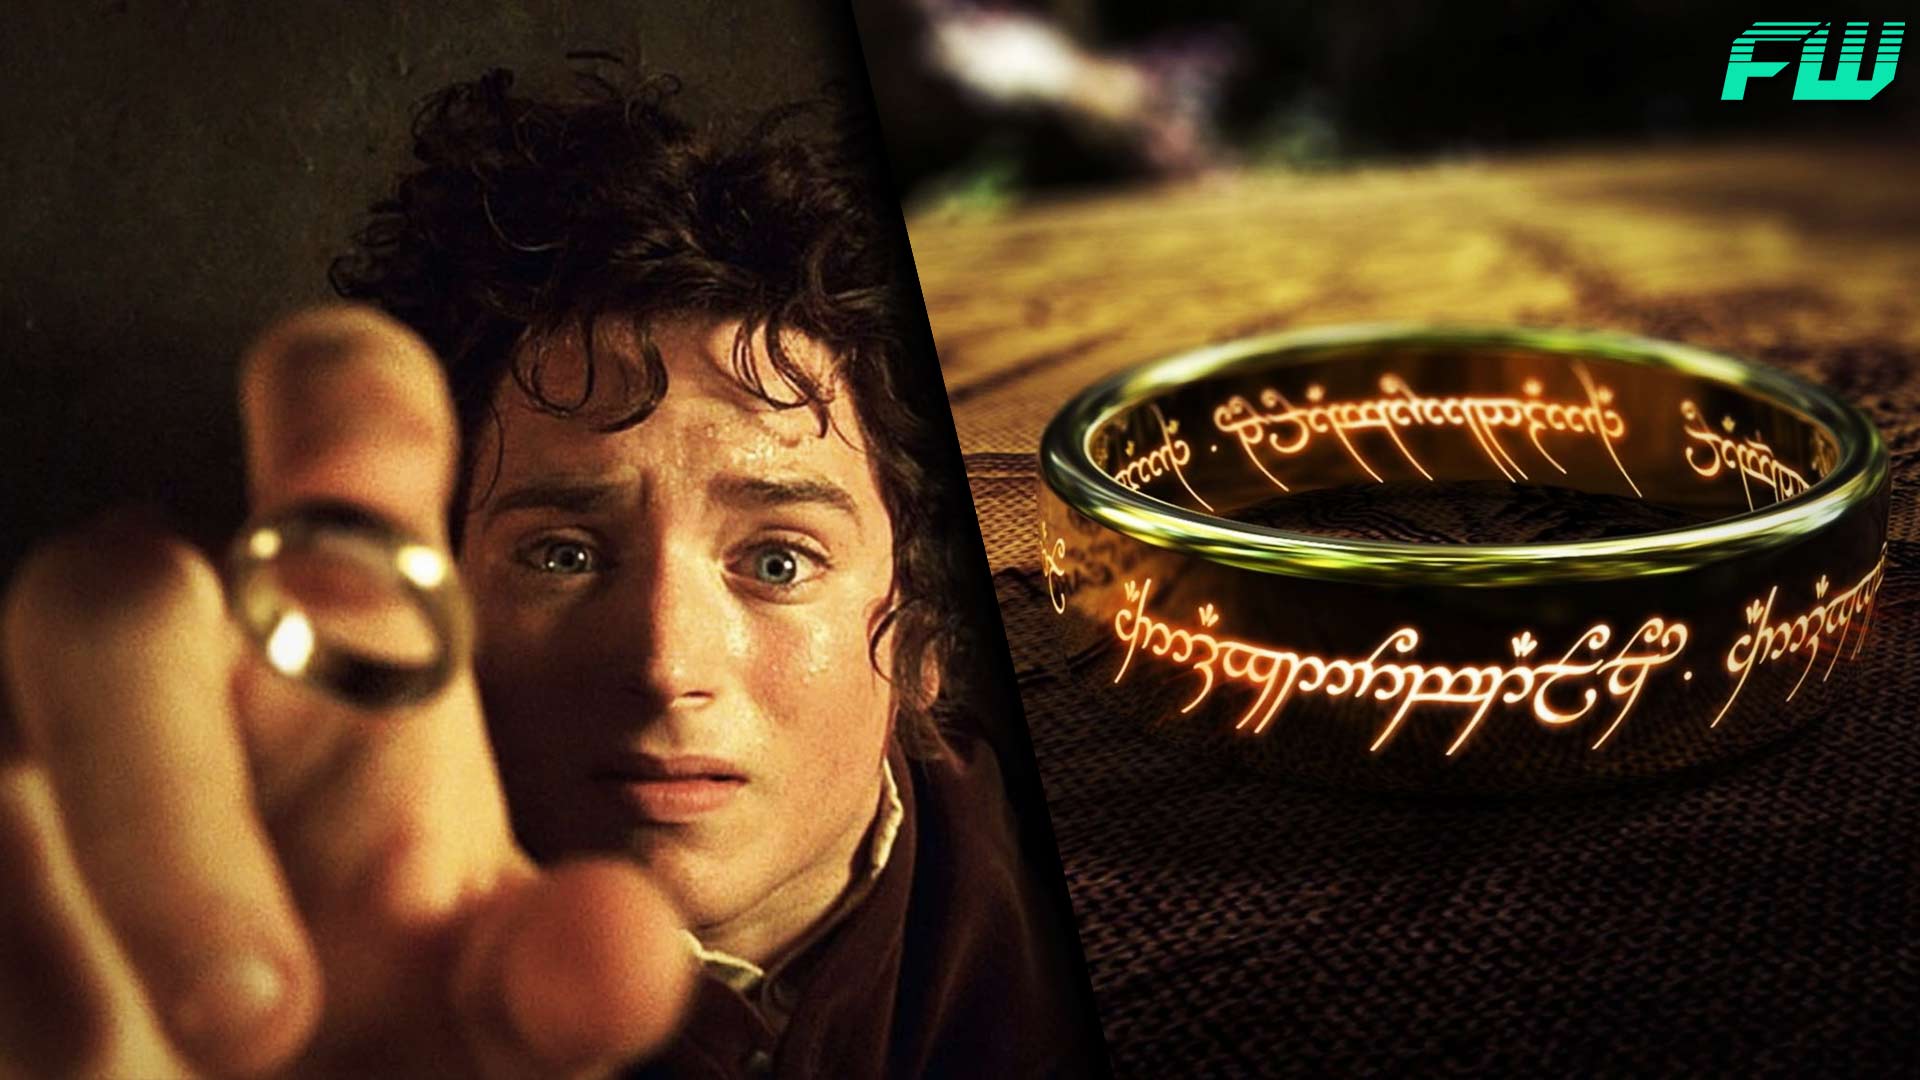 Elven Rings Of Power: All You Need To Know About The 3 Rings